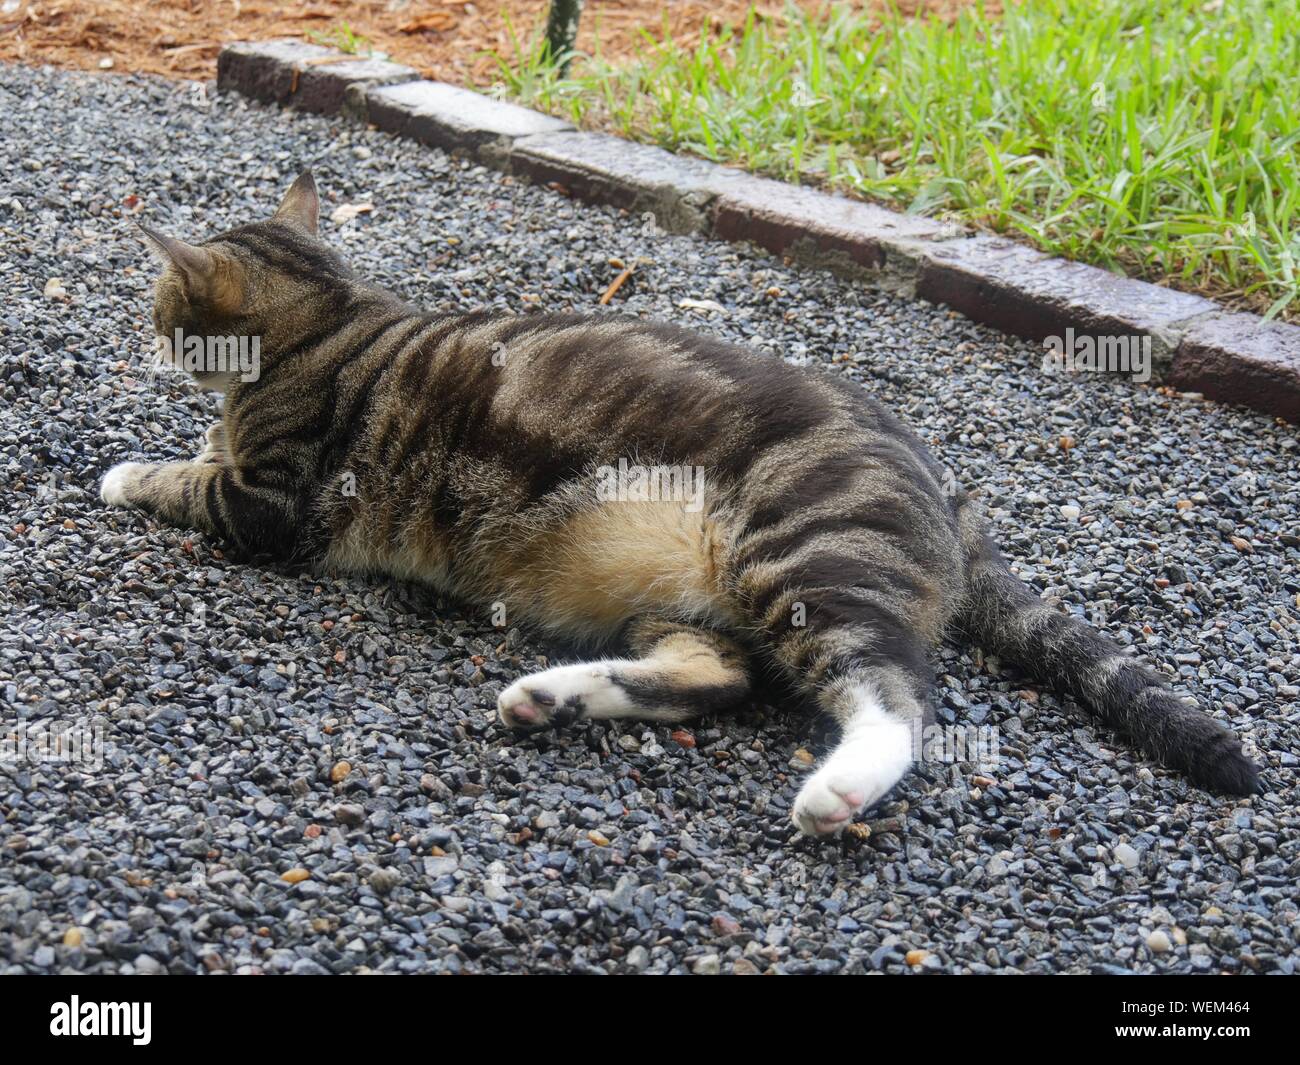 A pampered cat relaxes on the grounds at the Ernest Hemingway gardens in Key West, Florida. Stock Photo